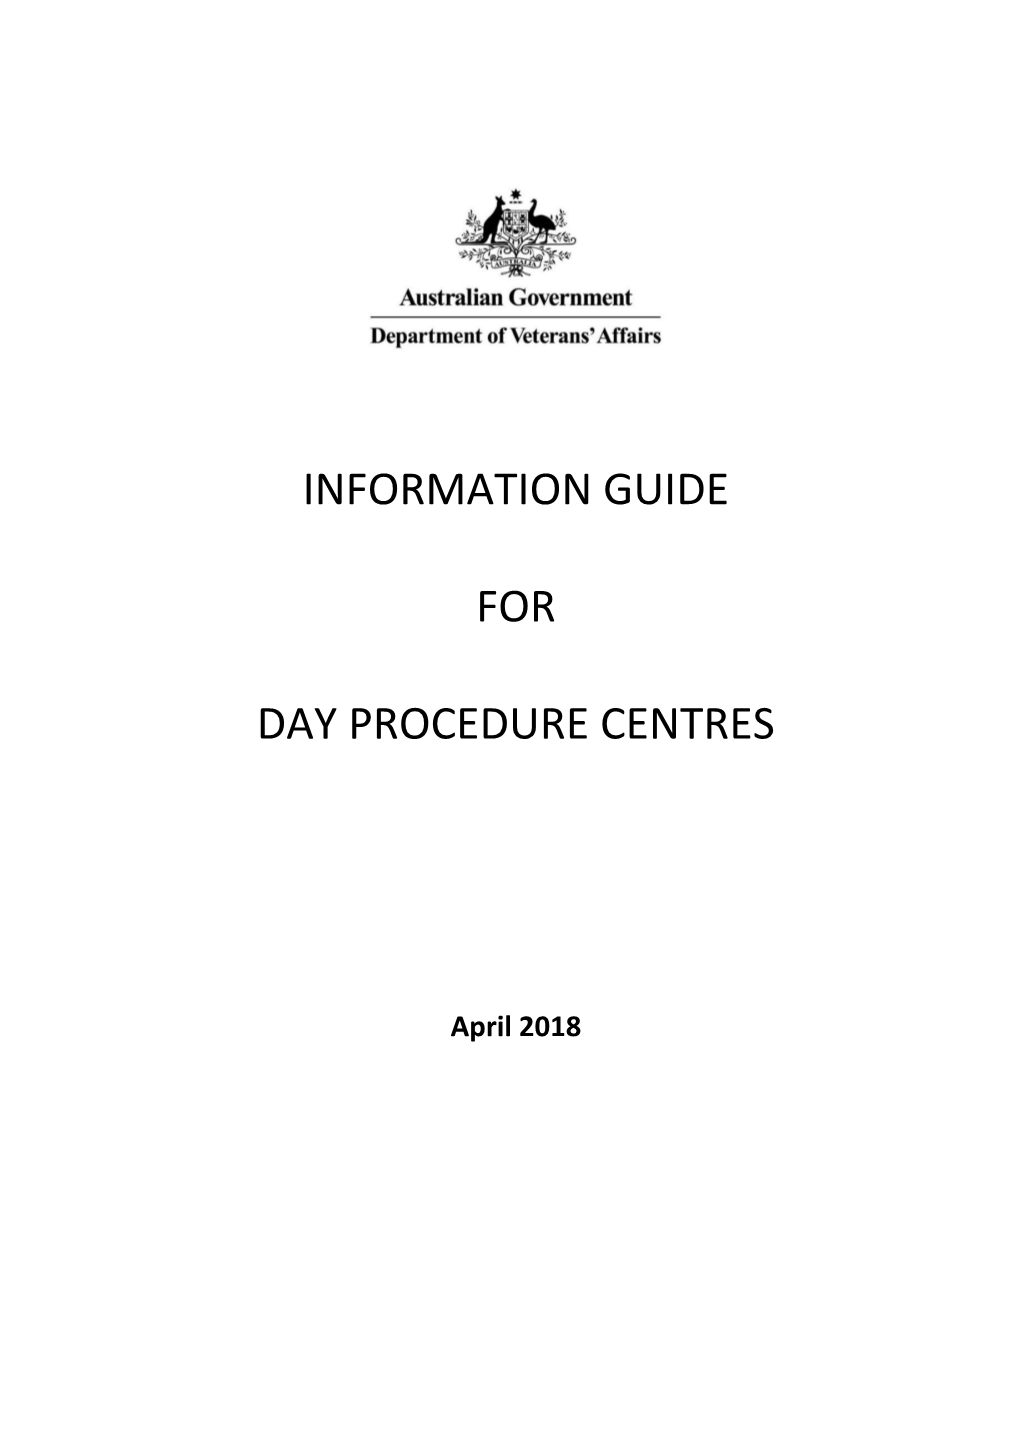 2The Day Procedure Centre Services Agreement